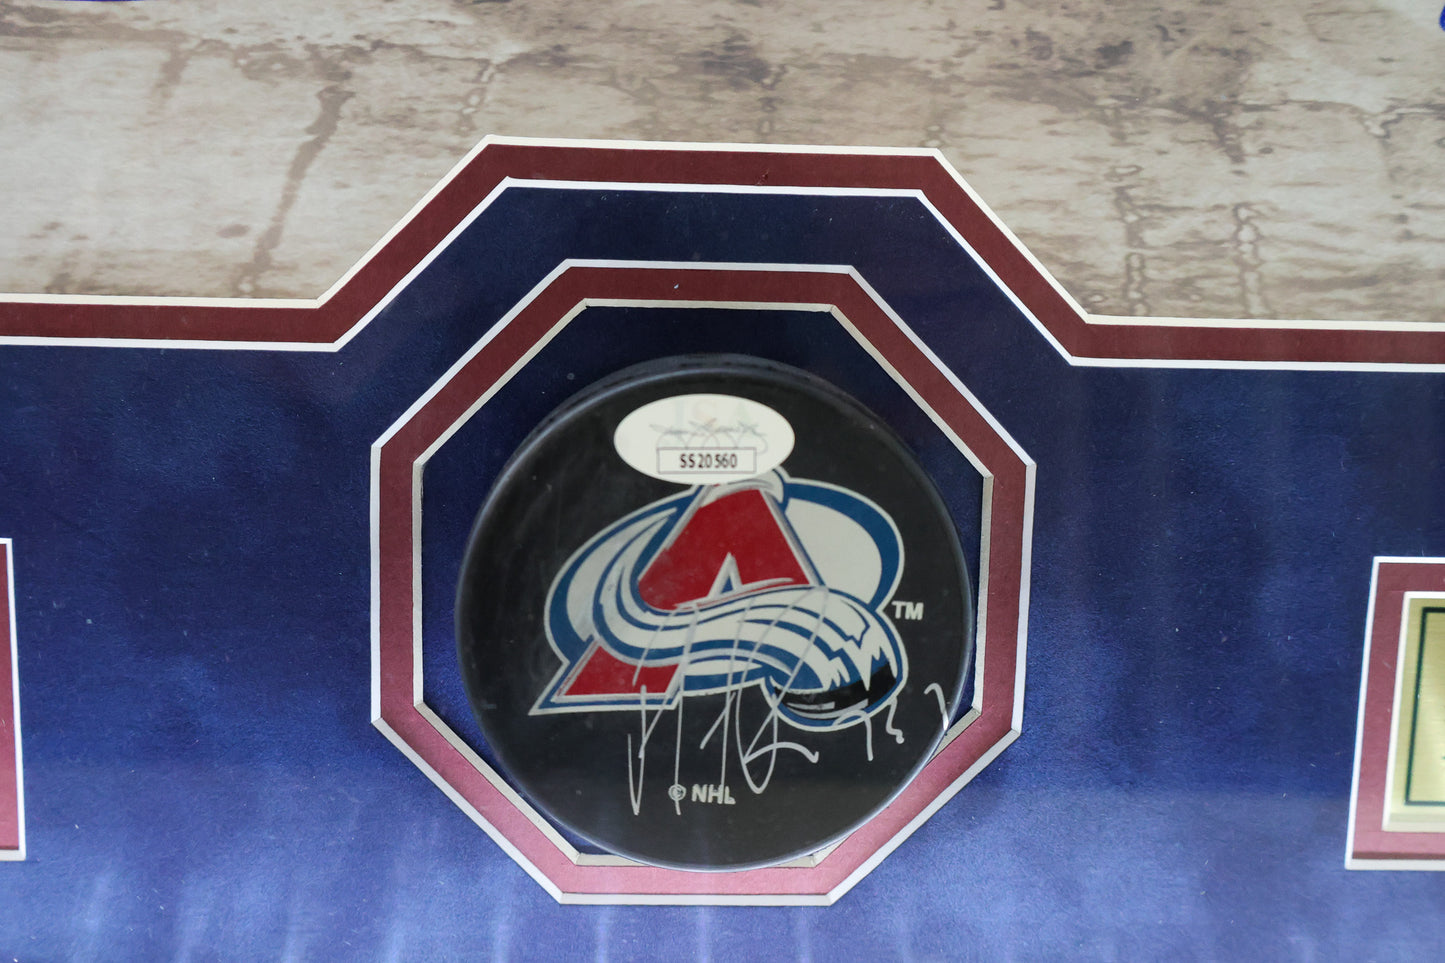 Joe Sakic & Peter Forsberg Autographed 16x20 Limited 74/333 with Patrick Roy Autographed Hockey Puck (JSA COA) Lighted Shadow Box